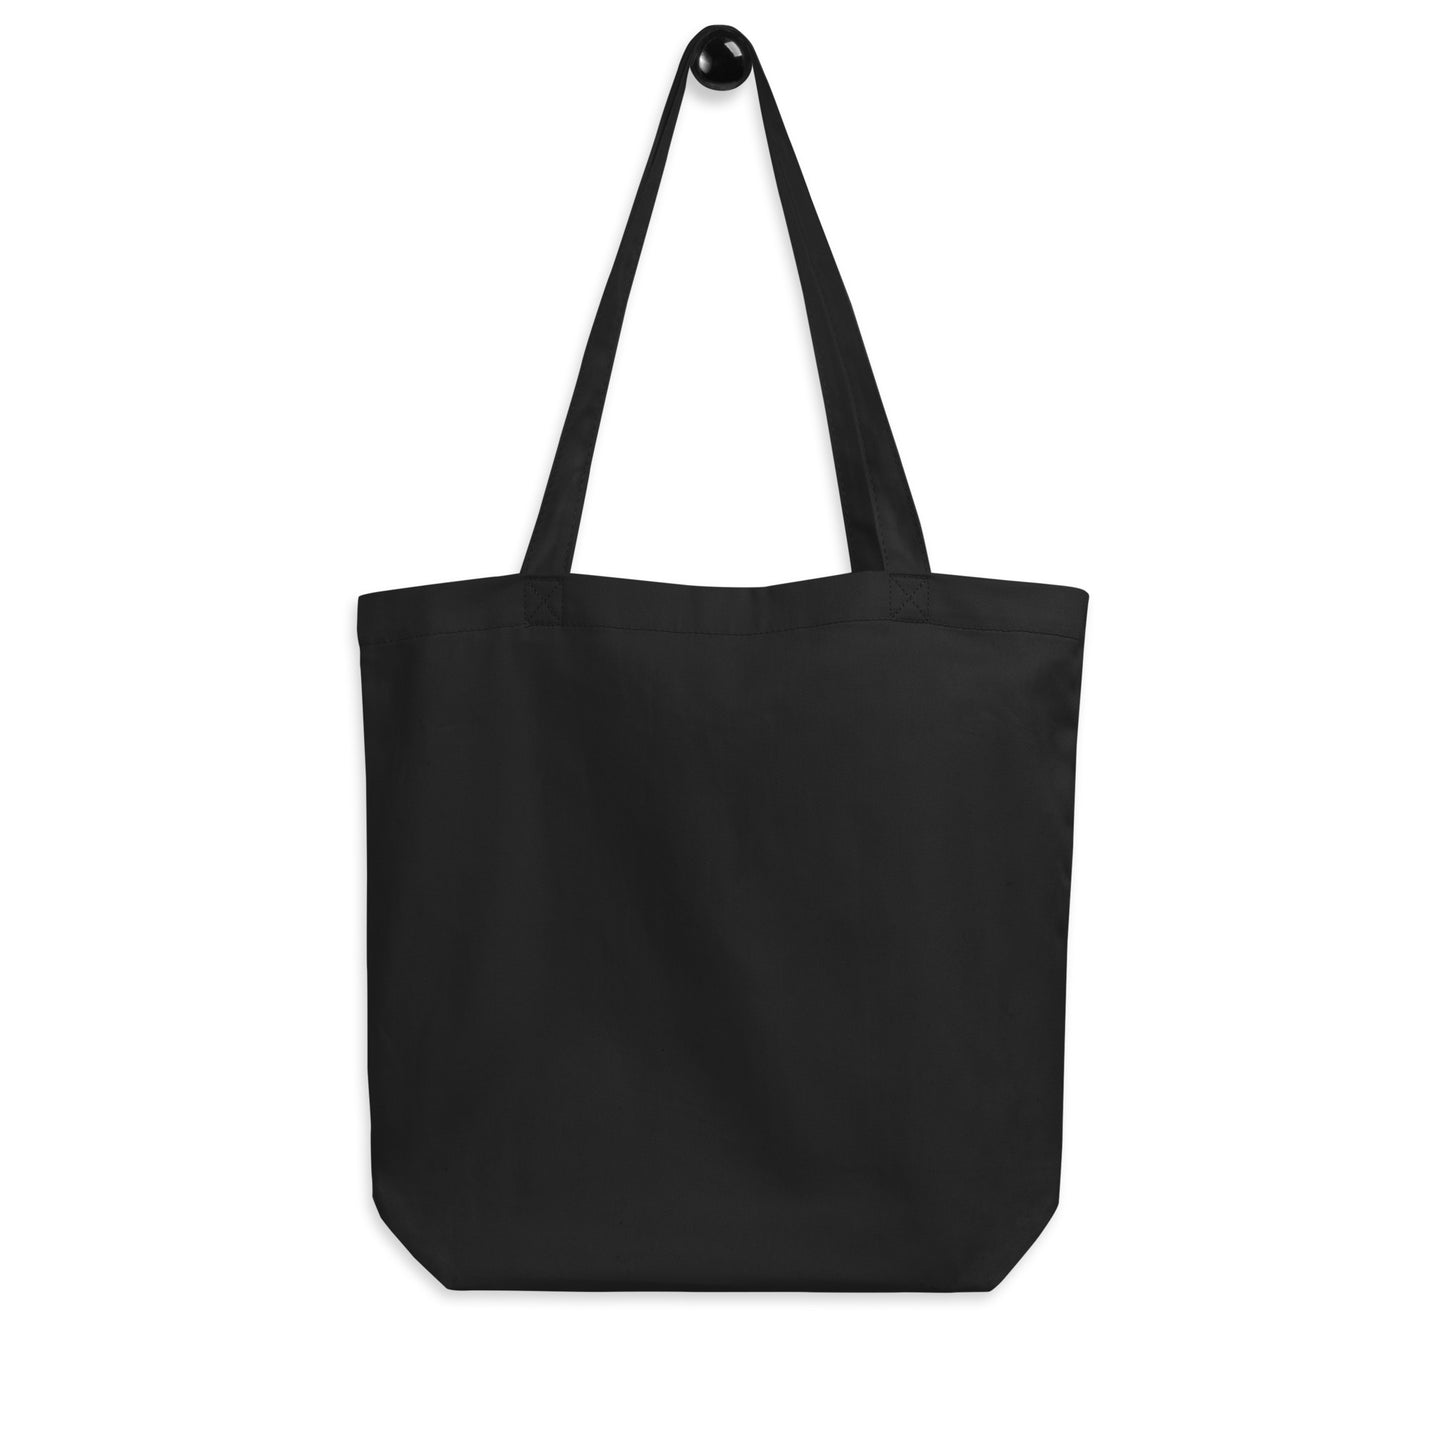 Stay present, stay BLESSED Black Eco Tote Bag